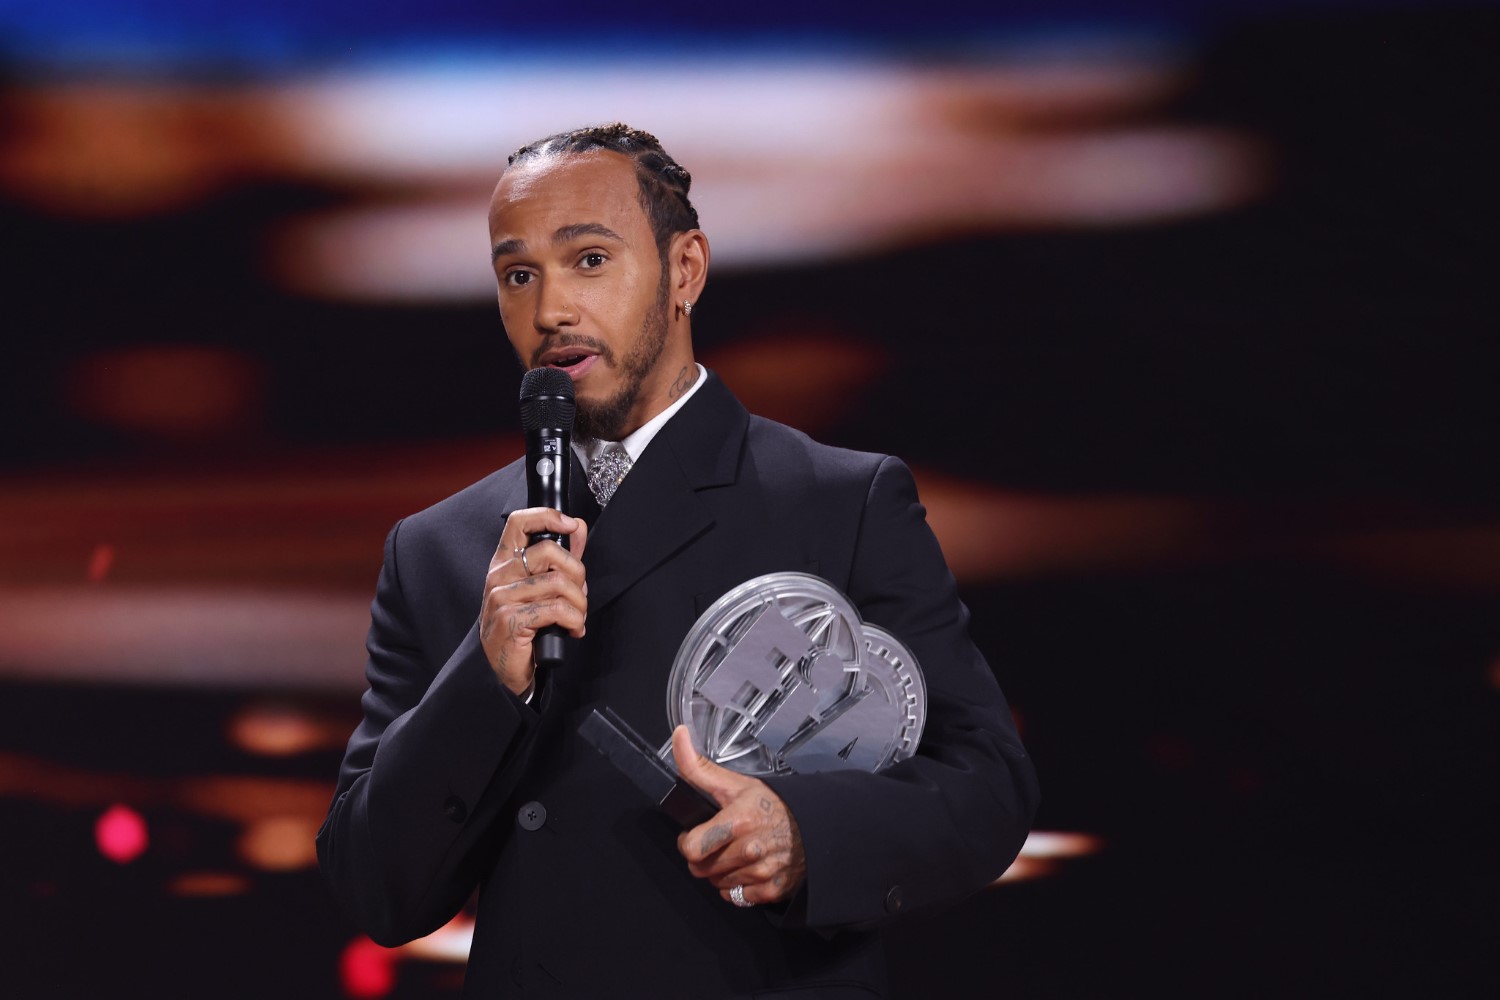 Lewis HAMILTON, FIA Formula One World Championship - 3rd Place, portrait during the 2023 FIA Prize Giving Ceremony in Baky on December 8, 2023 at Baku Convention Center in Baku, Azerbaijan - Photo Grégory Lenormand / DPPI